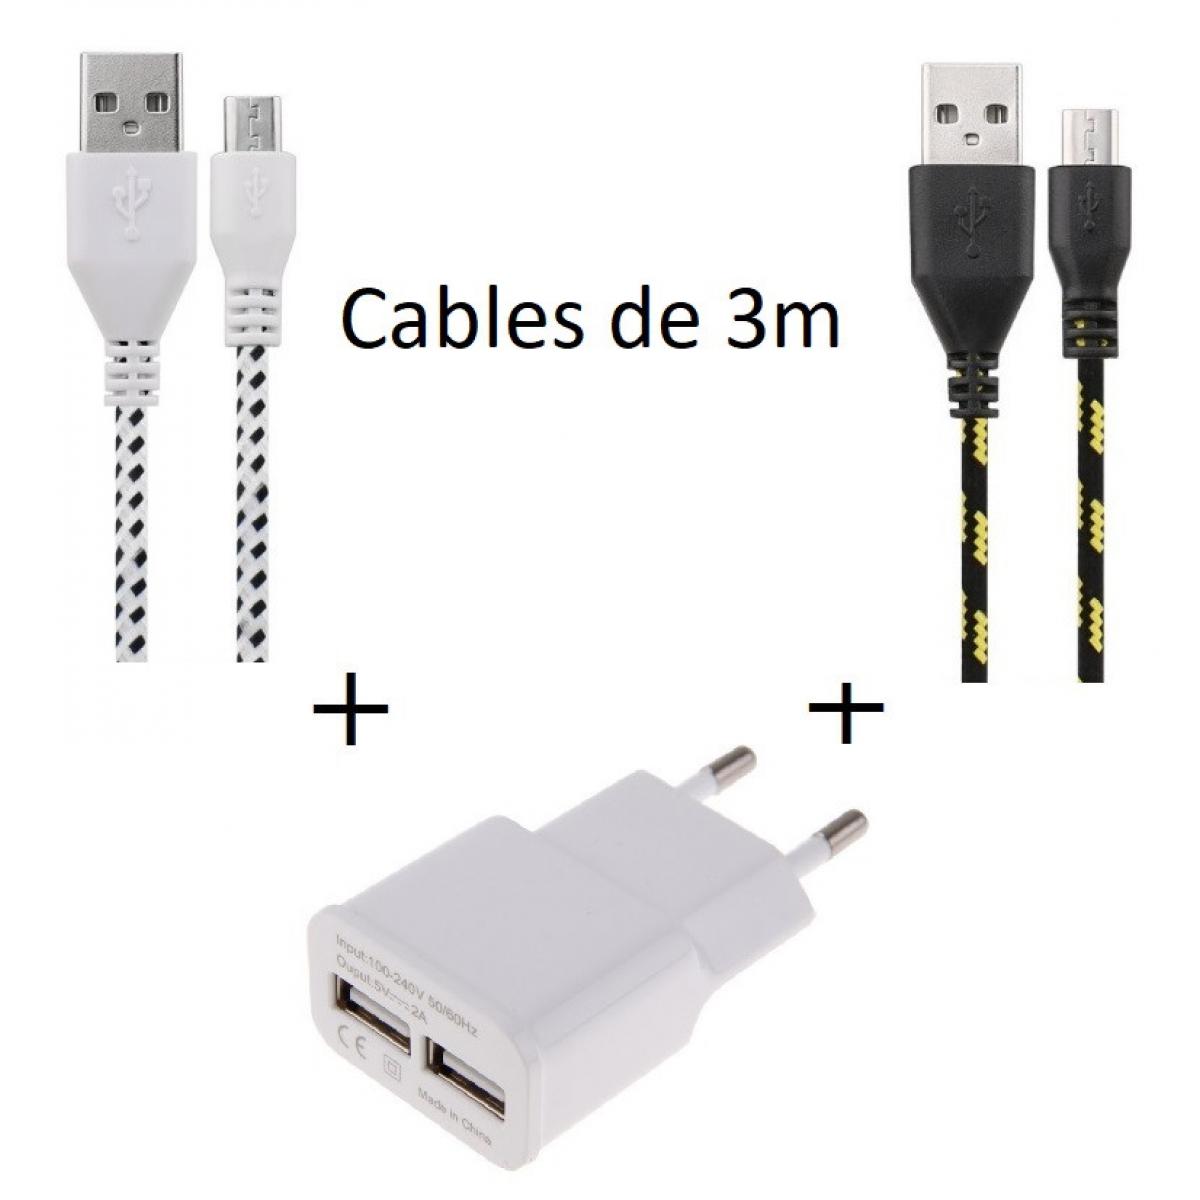 Shot - Pack Chargeur pour XIAOMI Redmi Note 6 Smartphone Android Micro USB (2 Cables Tresse 3m + Prise Secteur Double USB) - Chargeur secteur téléphone